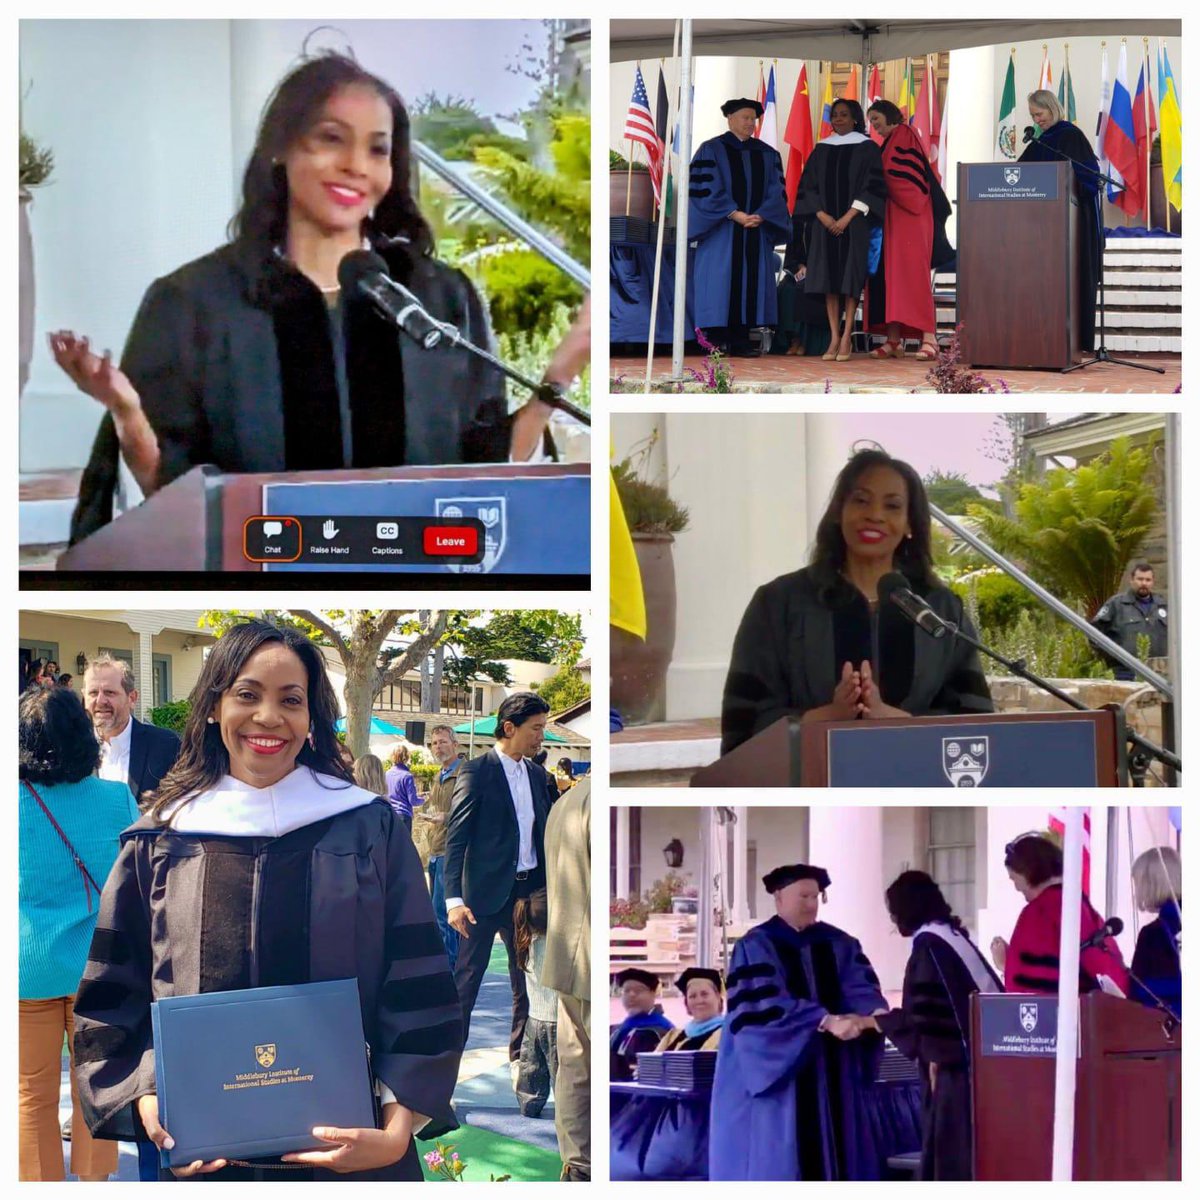 Great honour and privilege to deliver the commencement address & be awarded an honorary degree - Doctor of Humane Letters (Honoris Causa) from the Middlebury Institute of International Studies @MIIS #Jamaica🇯🇲 #CARICOM #hibakusha #womenindisarmament #youthempowerment #OneLove